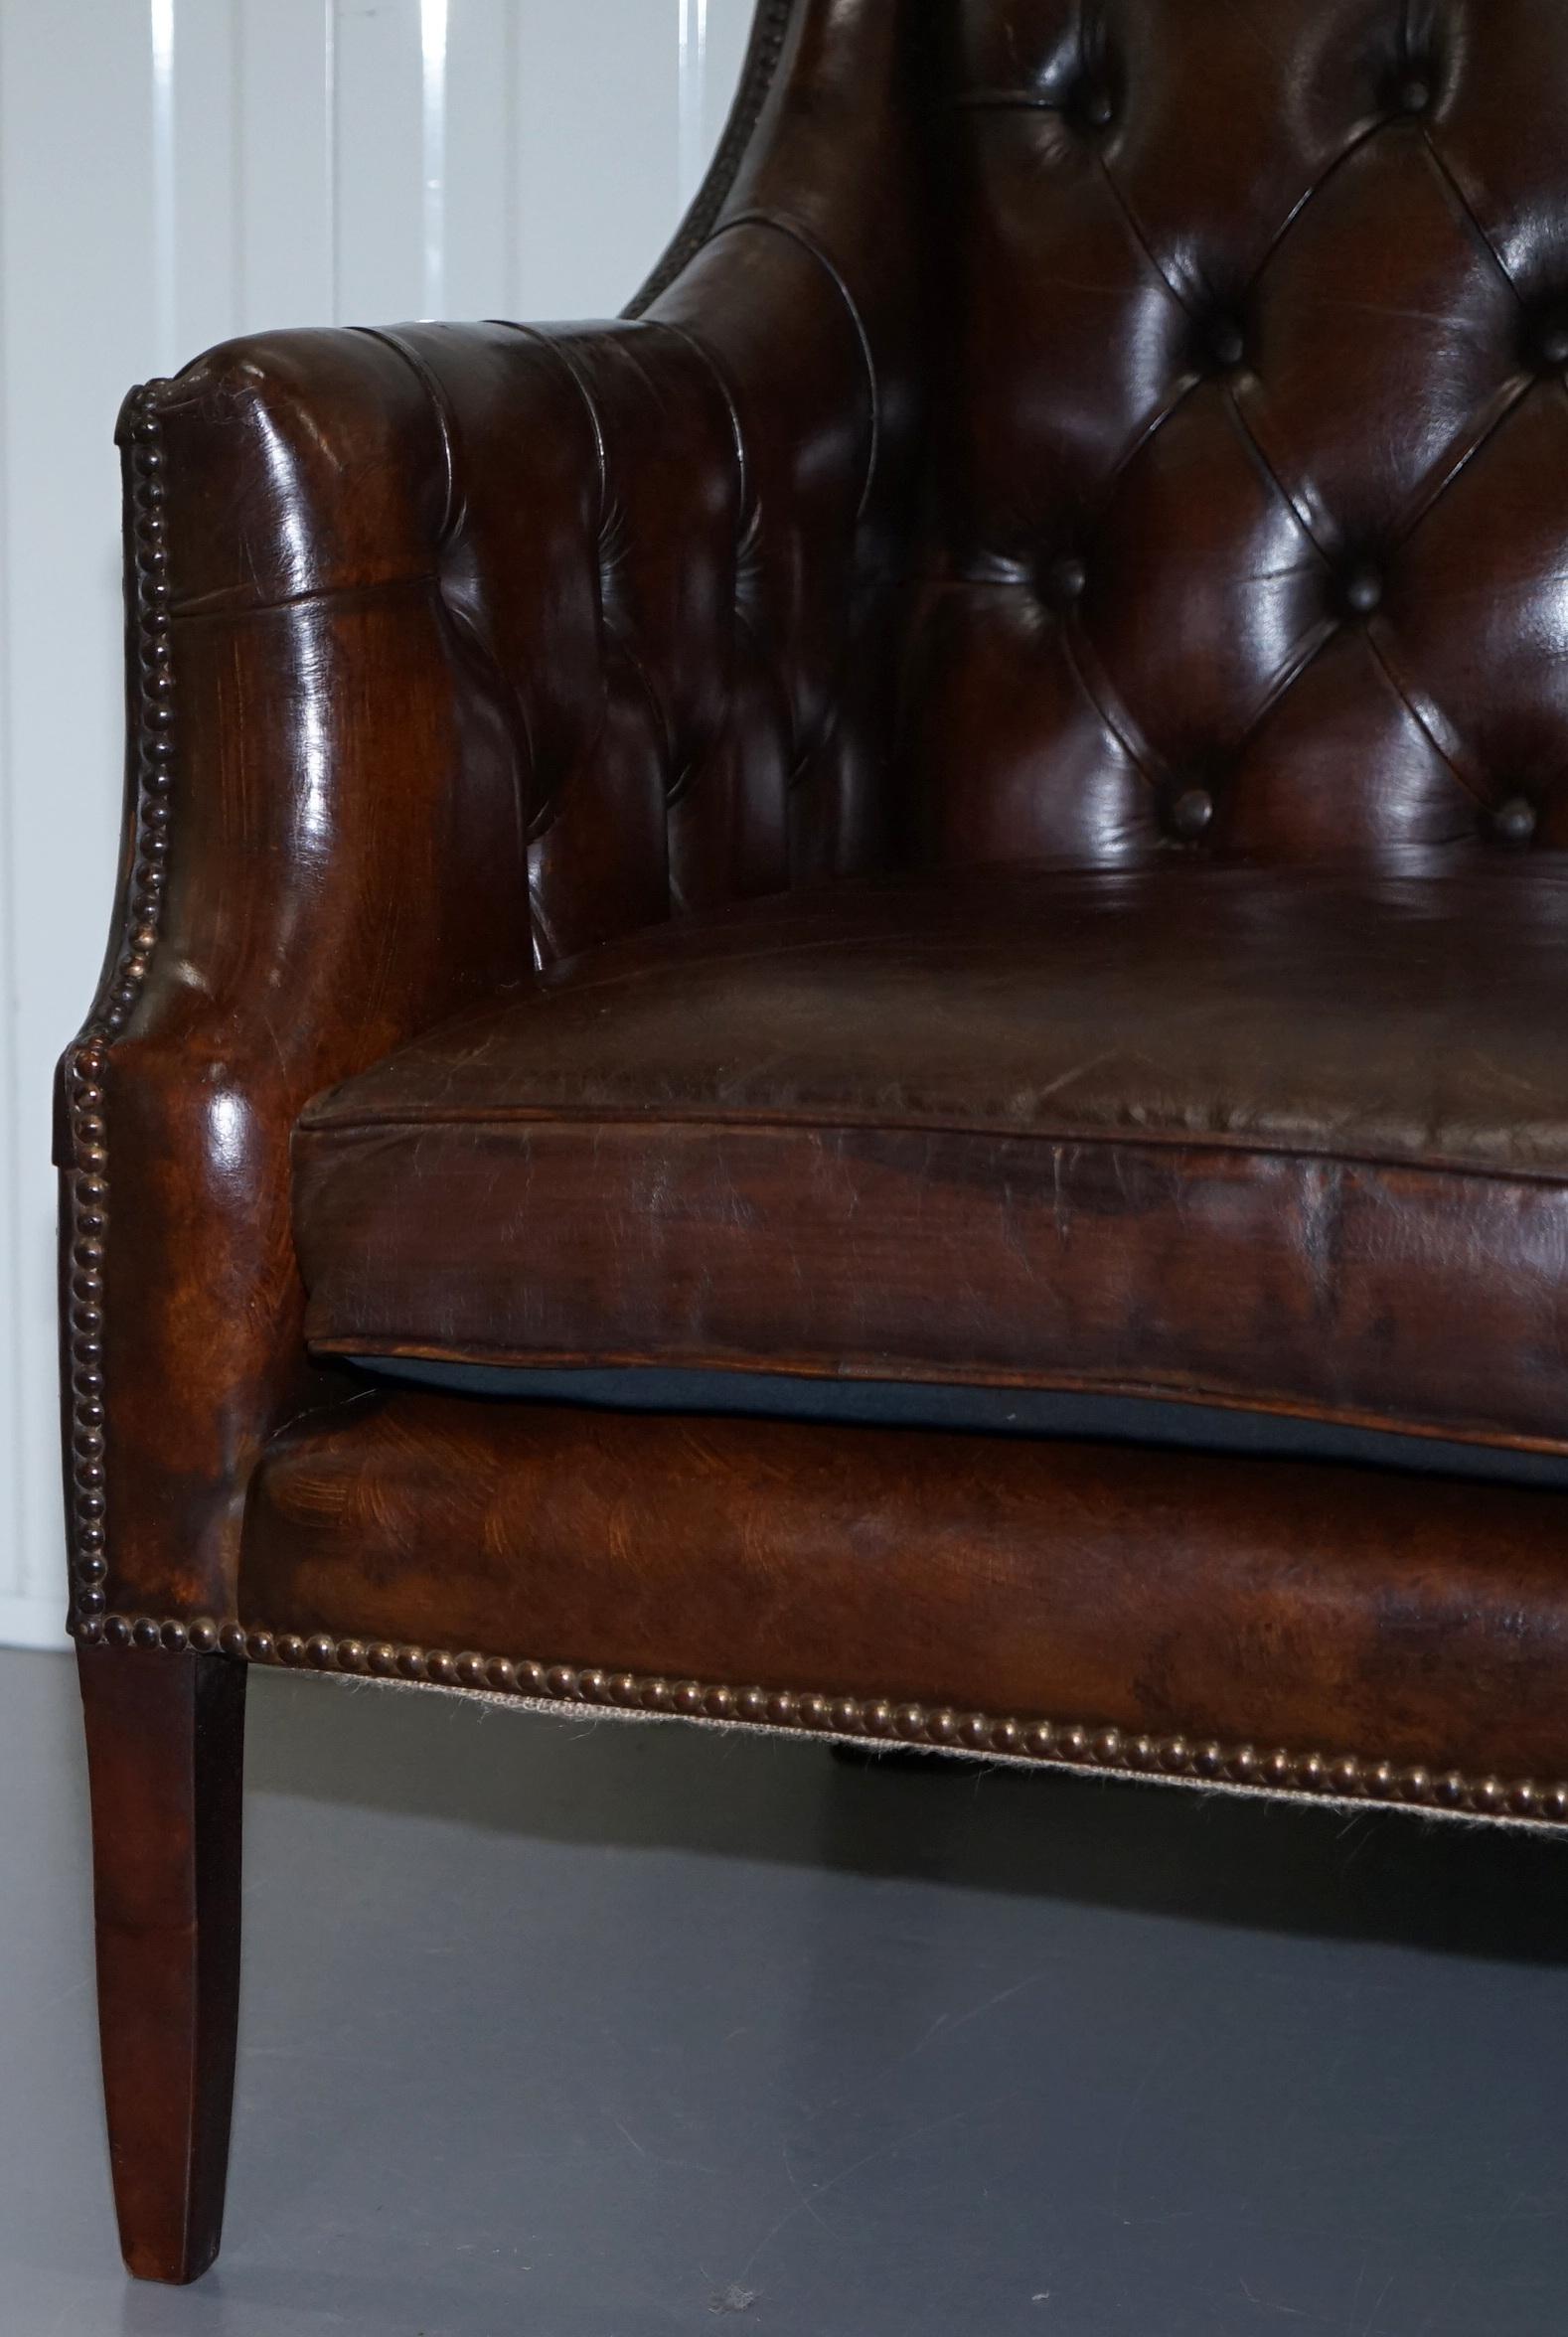 Restored Lutyen's Viceroy Chesterfield Brown Leather Two-Seat Sofa 3